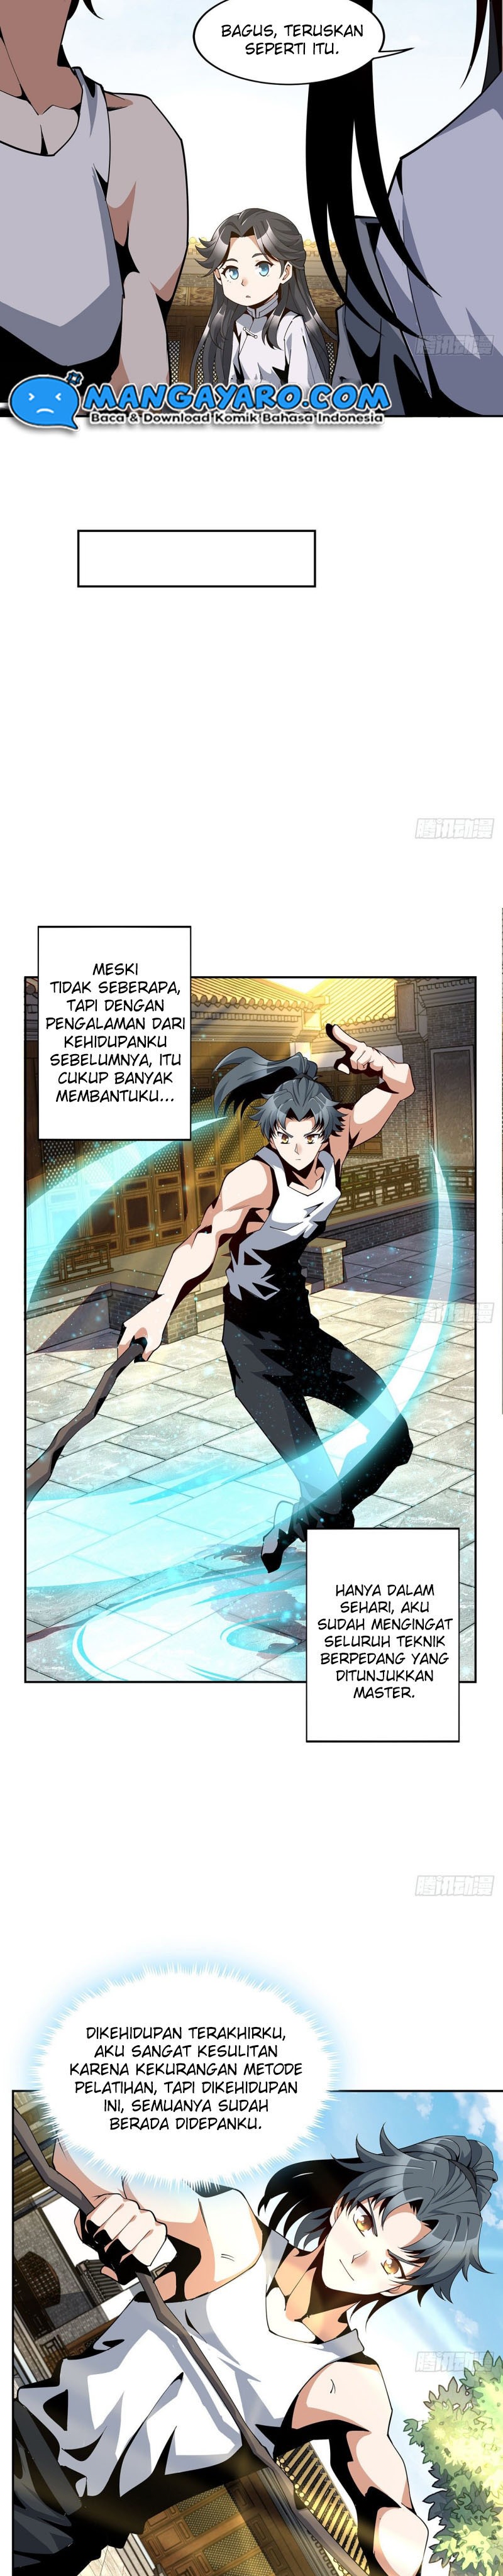 The First Sword of Earth Chapter 05